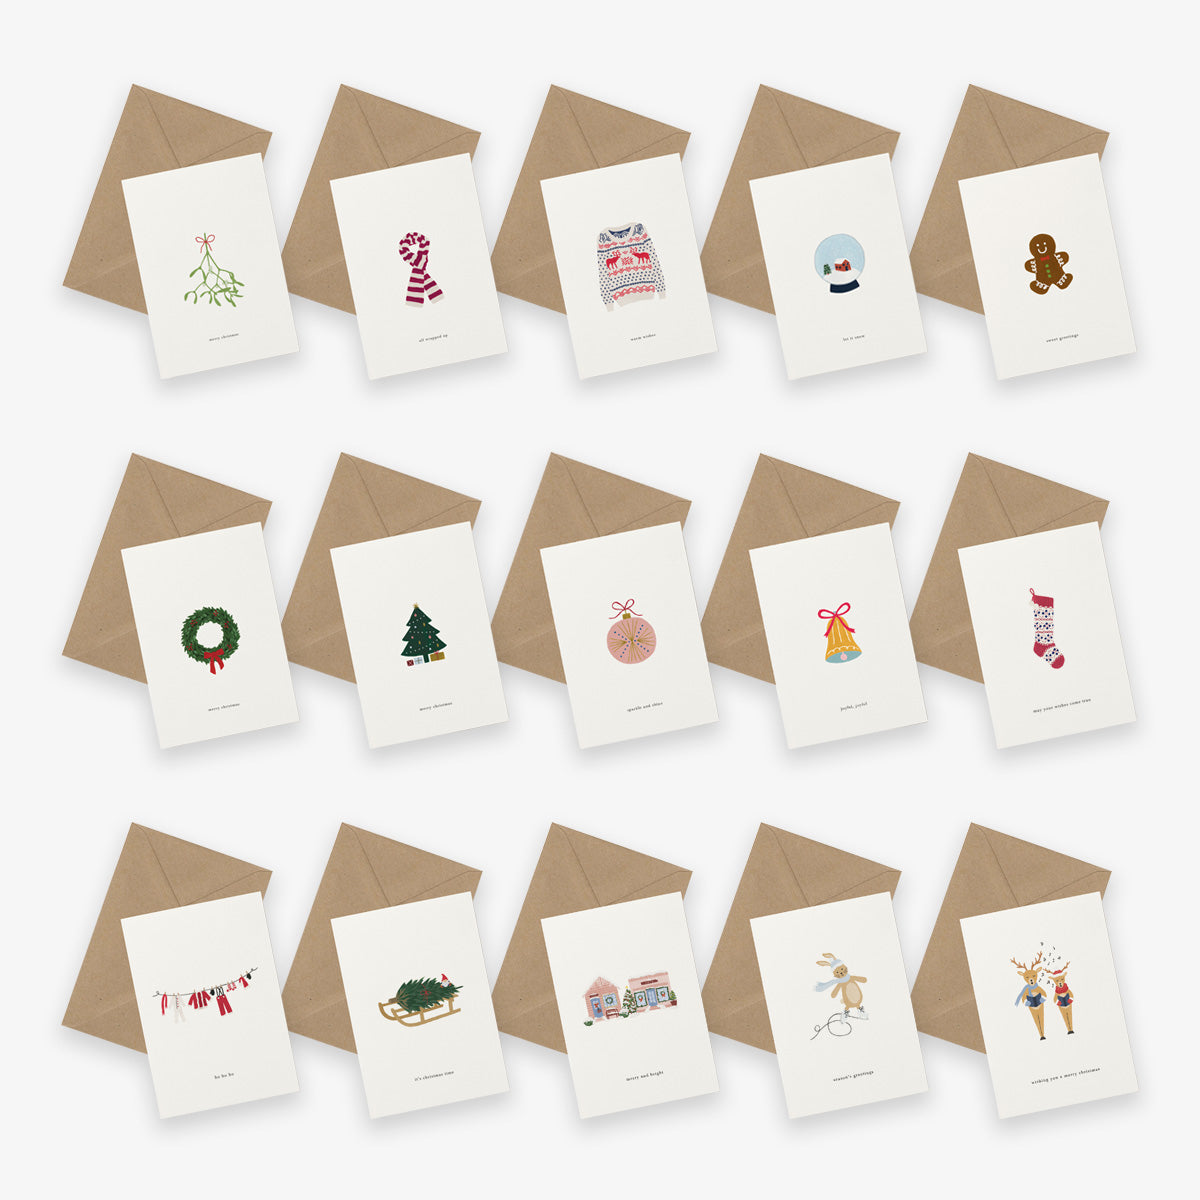 GREETING CARD SET OF 15 // ALL CHRISTMAS CARDS